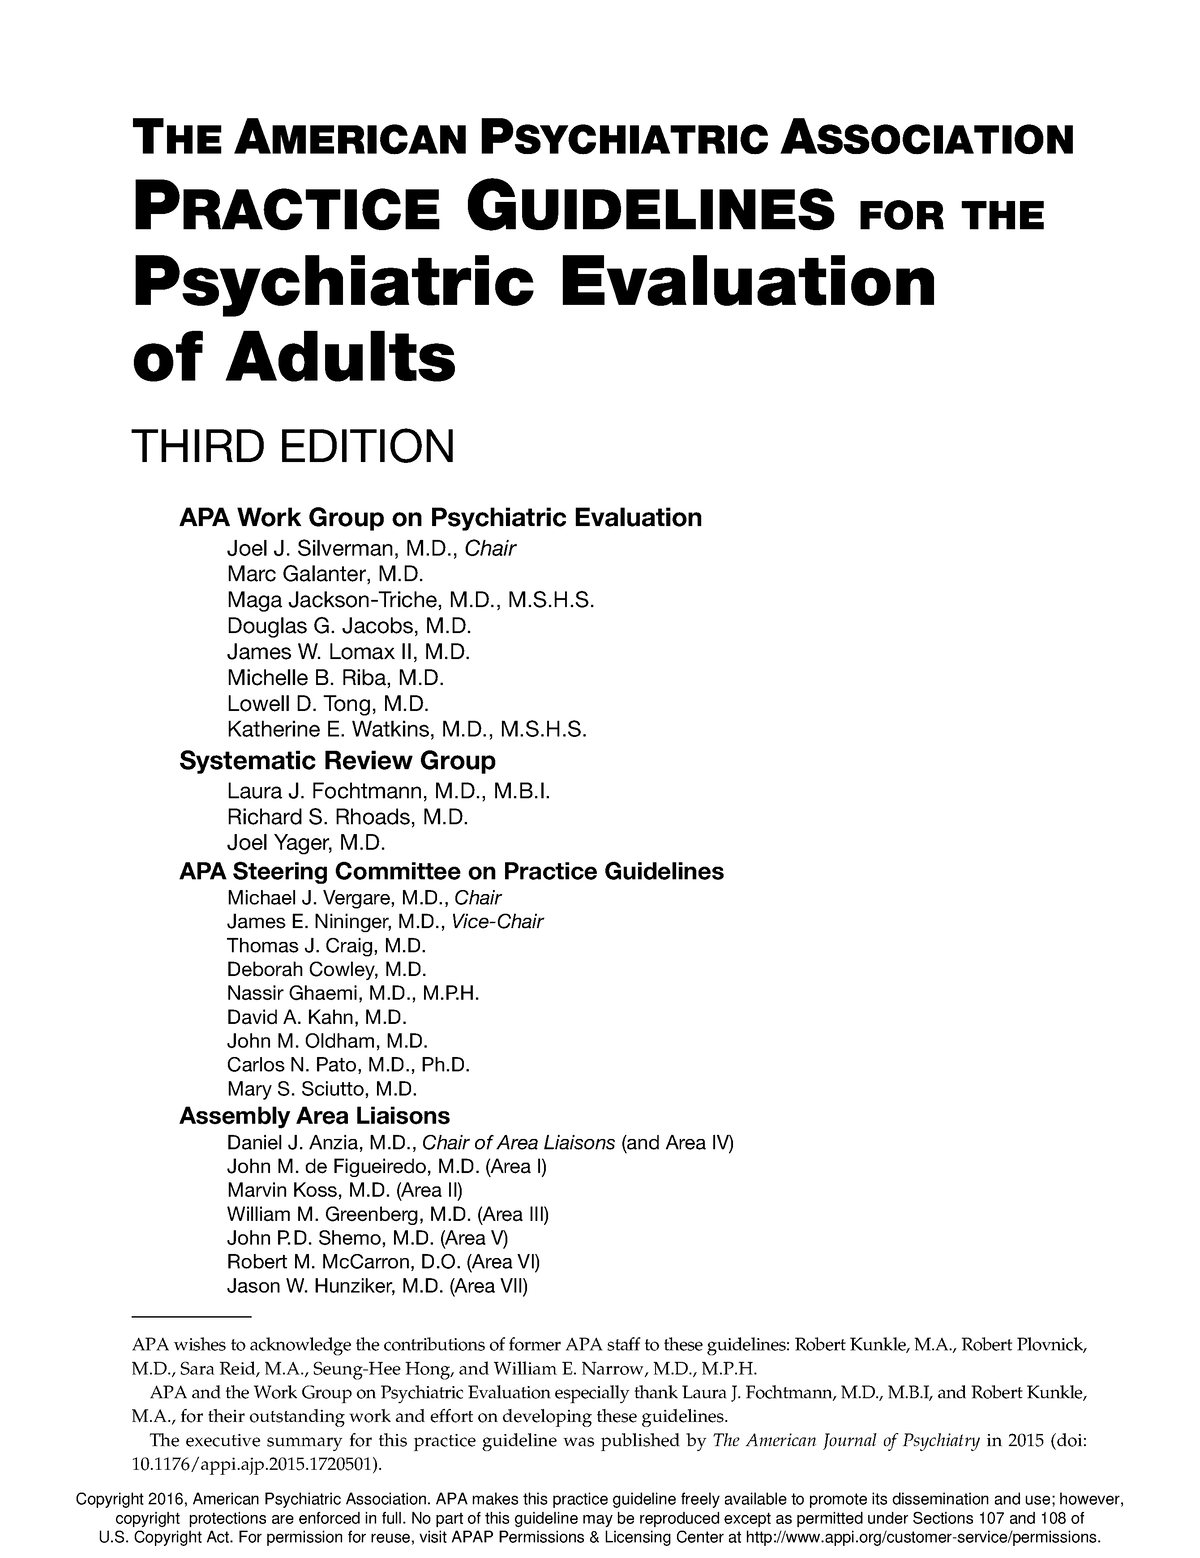 THE American Psychiatric Association Practice Guidelines FOR THE